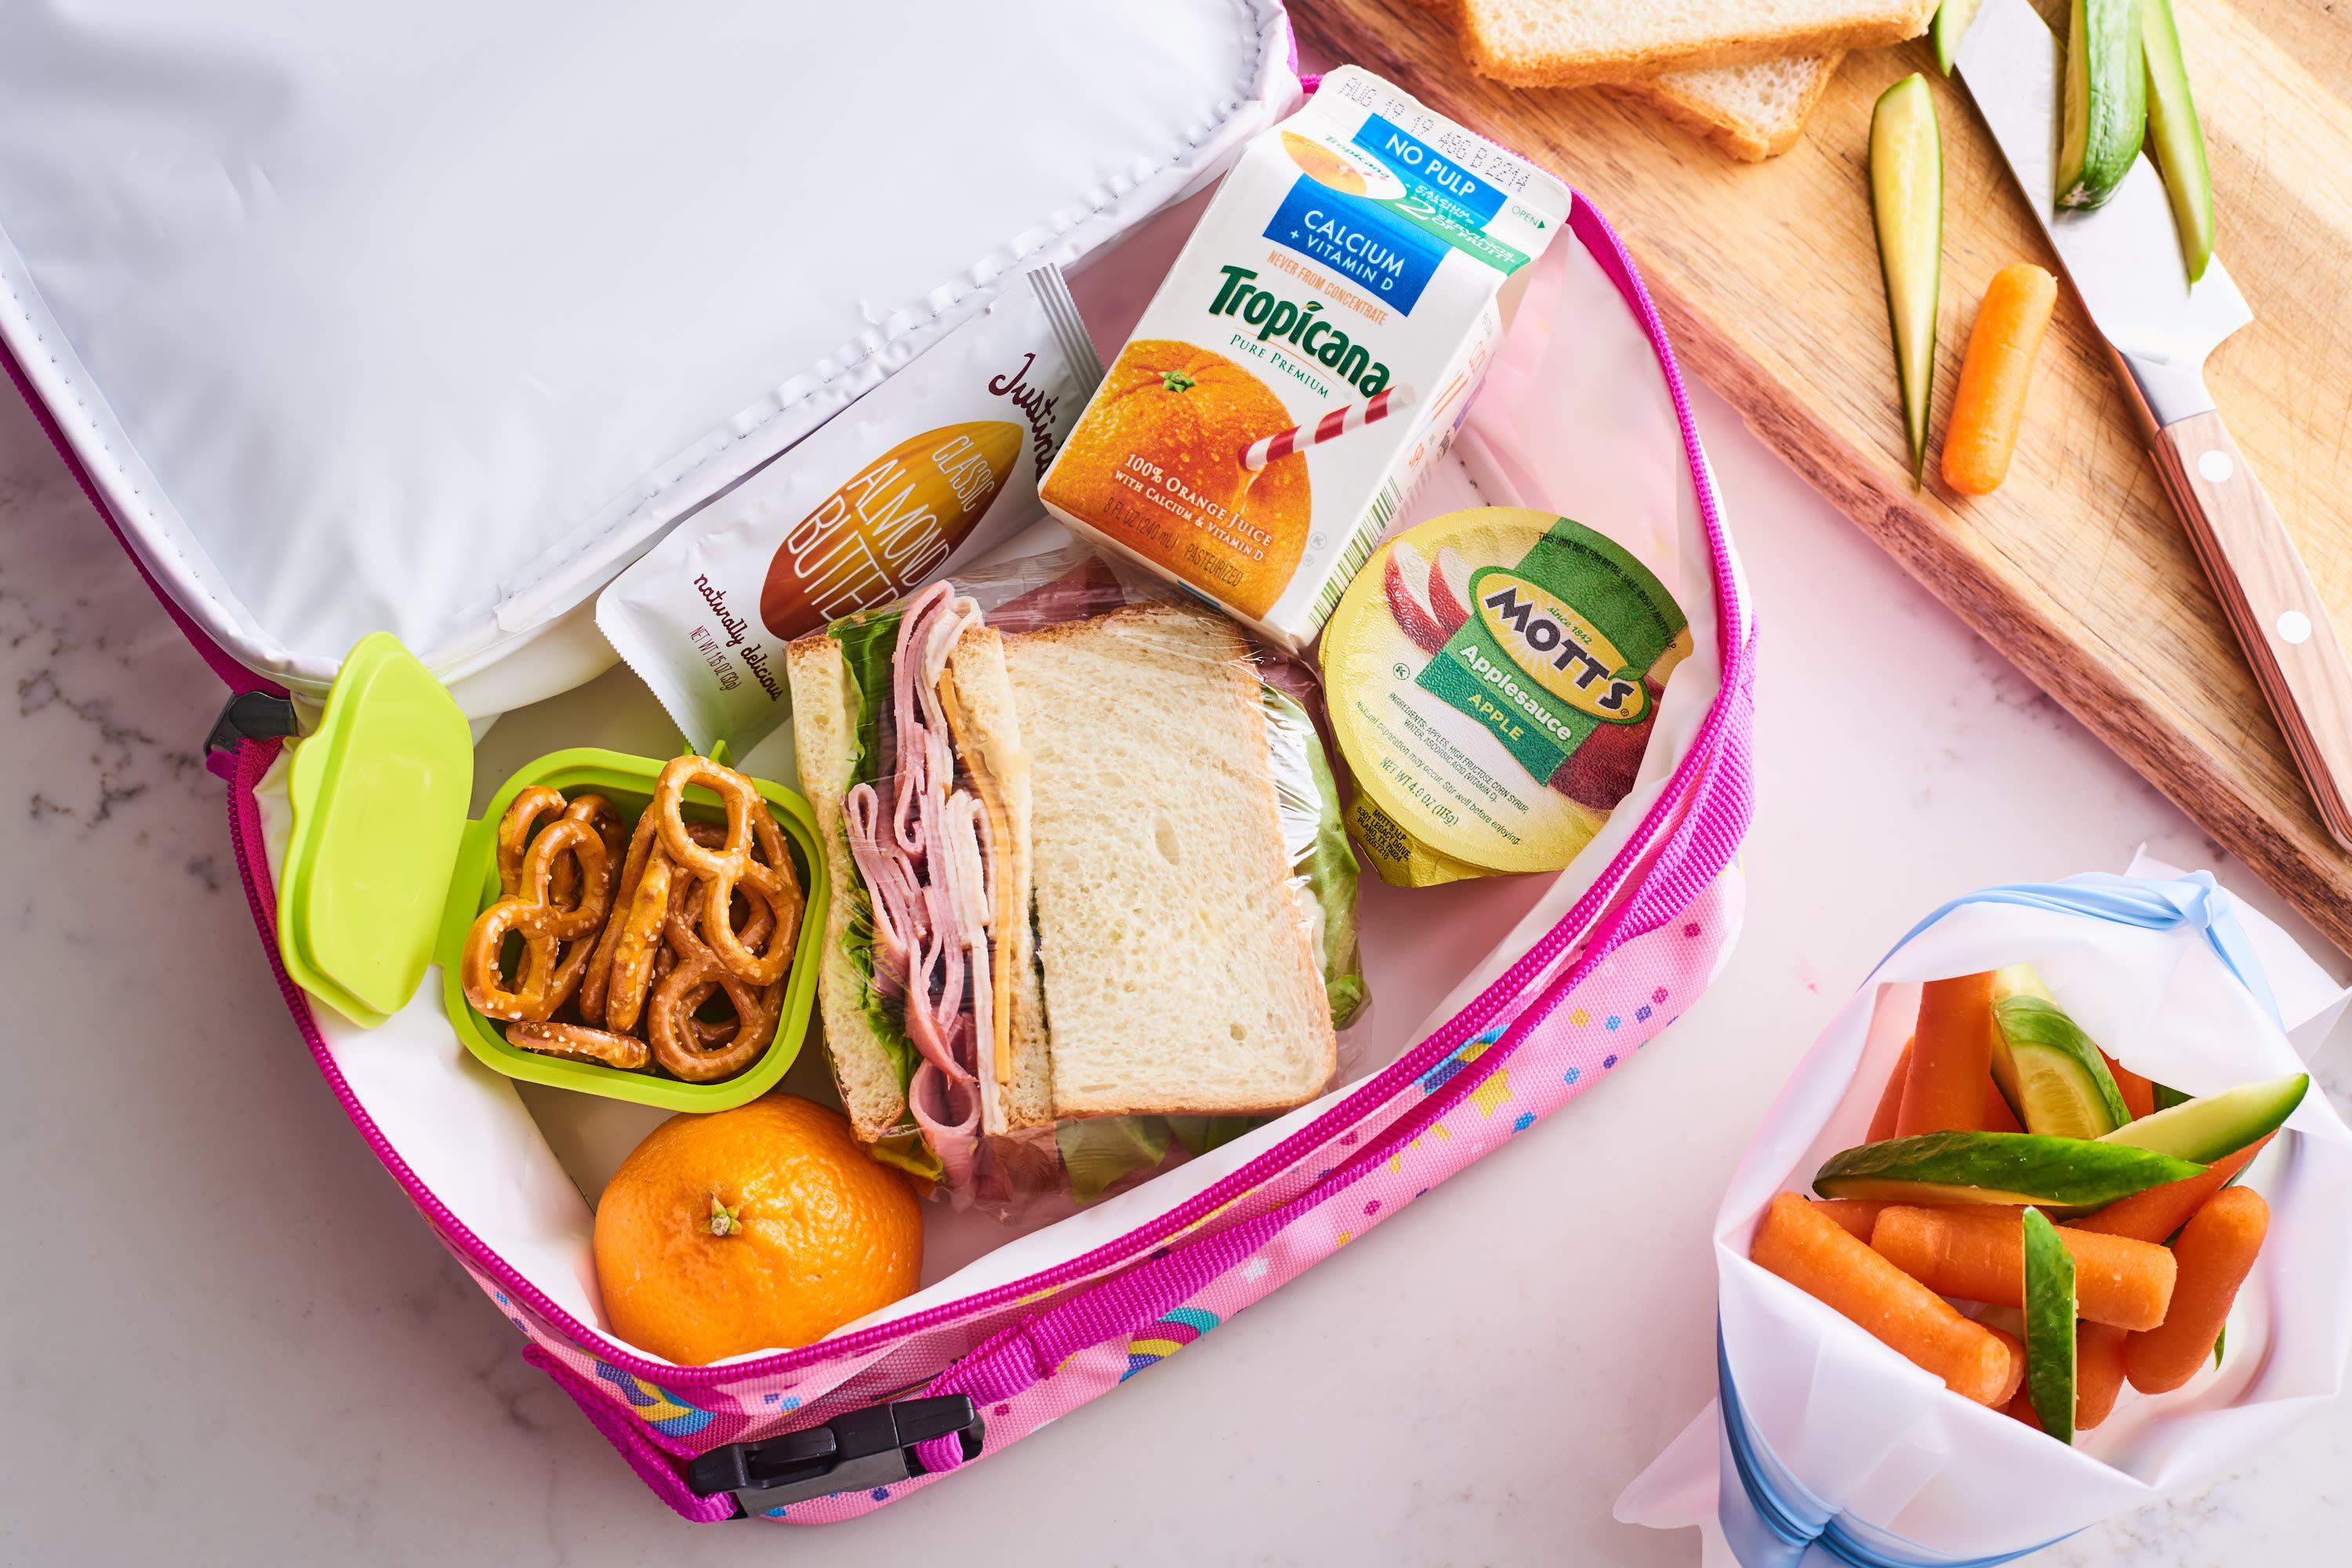 How to Keep Lunch Warm or Cold in The Lunchbox - Live Simply